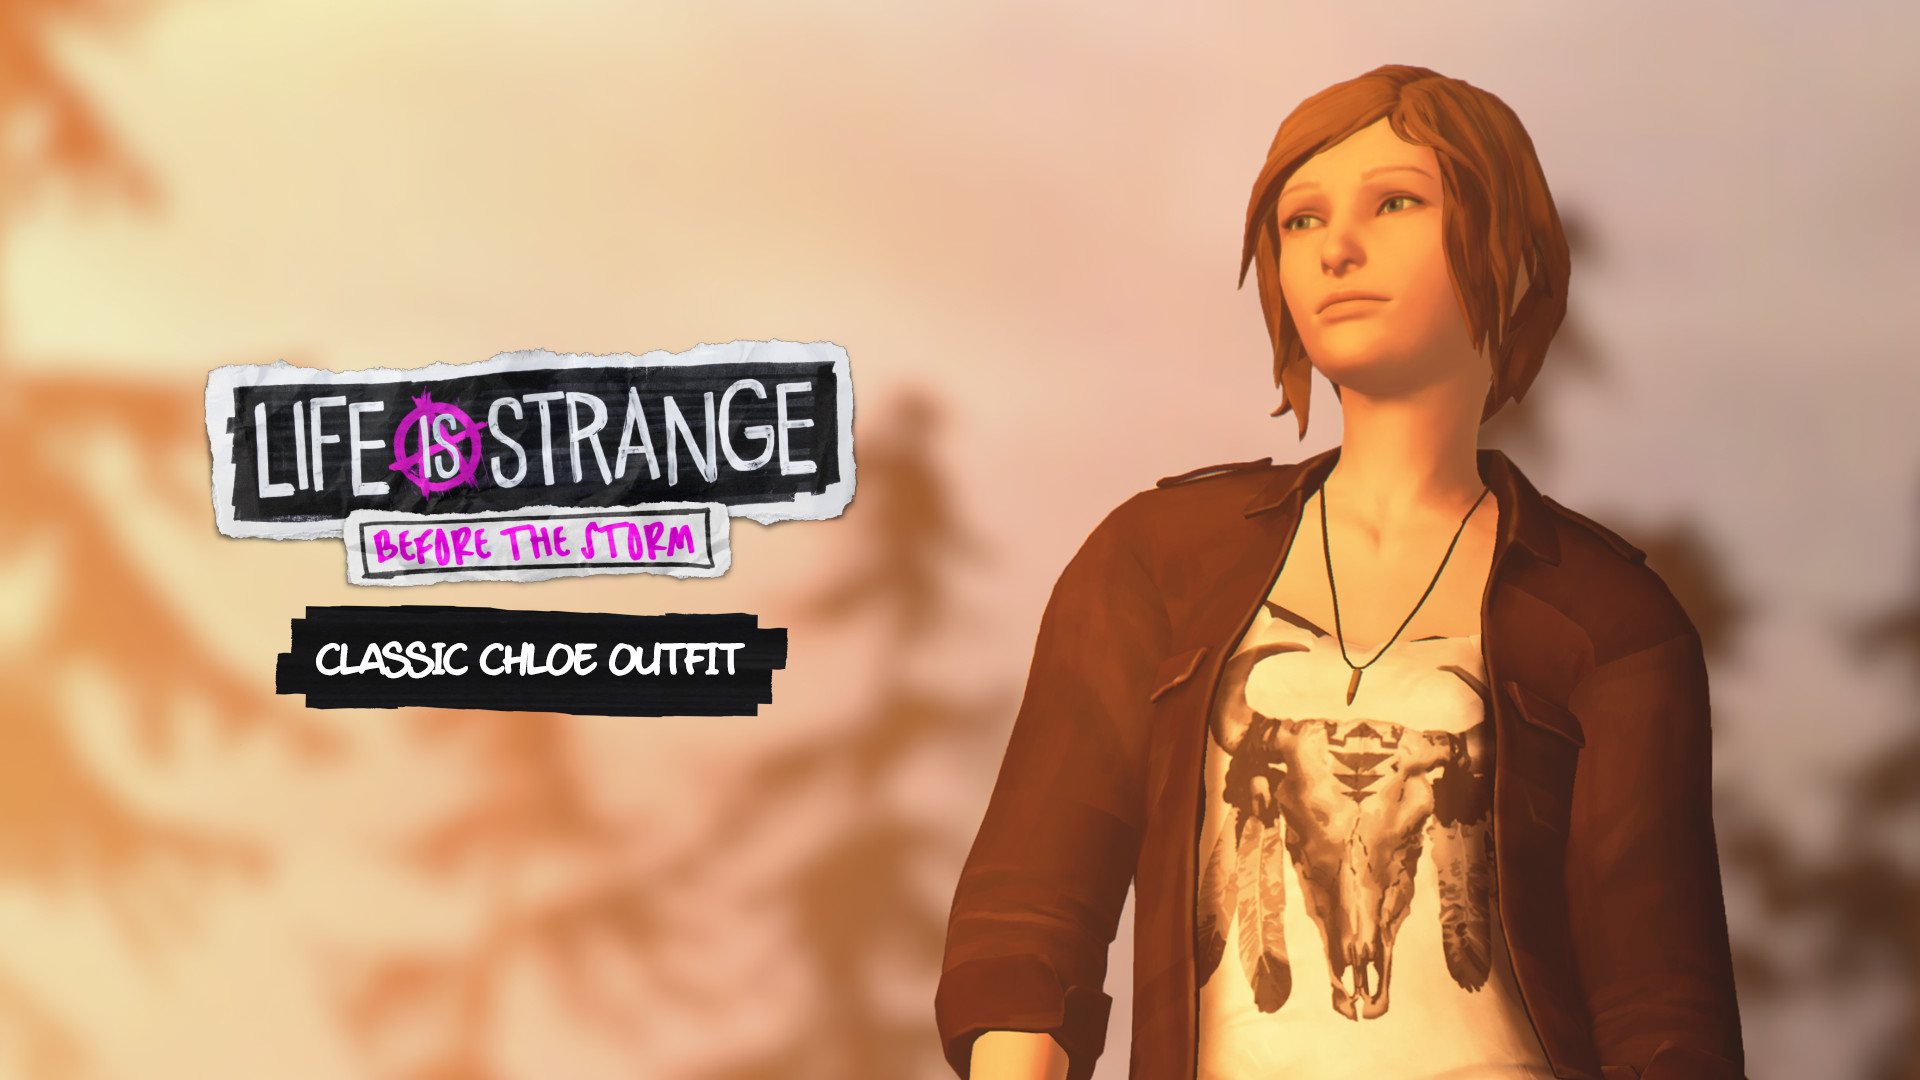 Life is Strange: Before the Storm - Classic Chloe Outfit Pack DLC XBOX One CD Key, $0.89